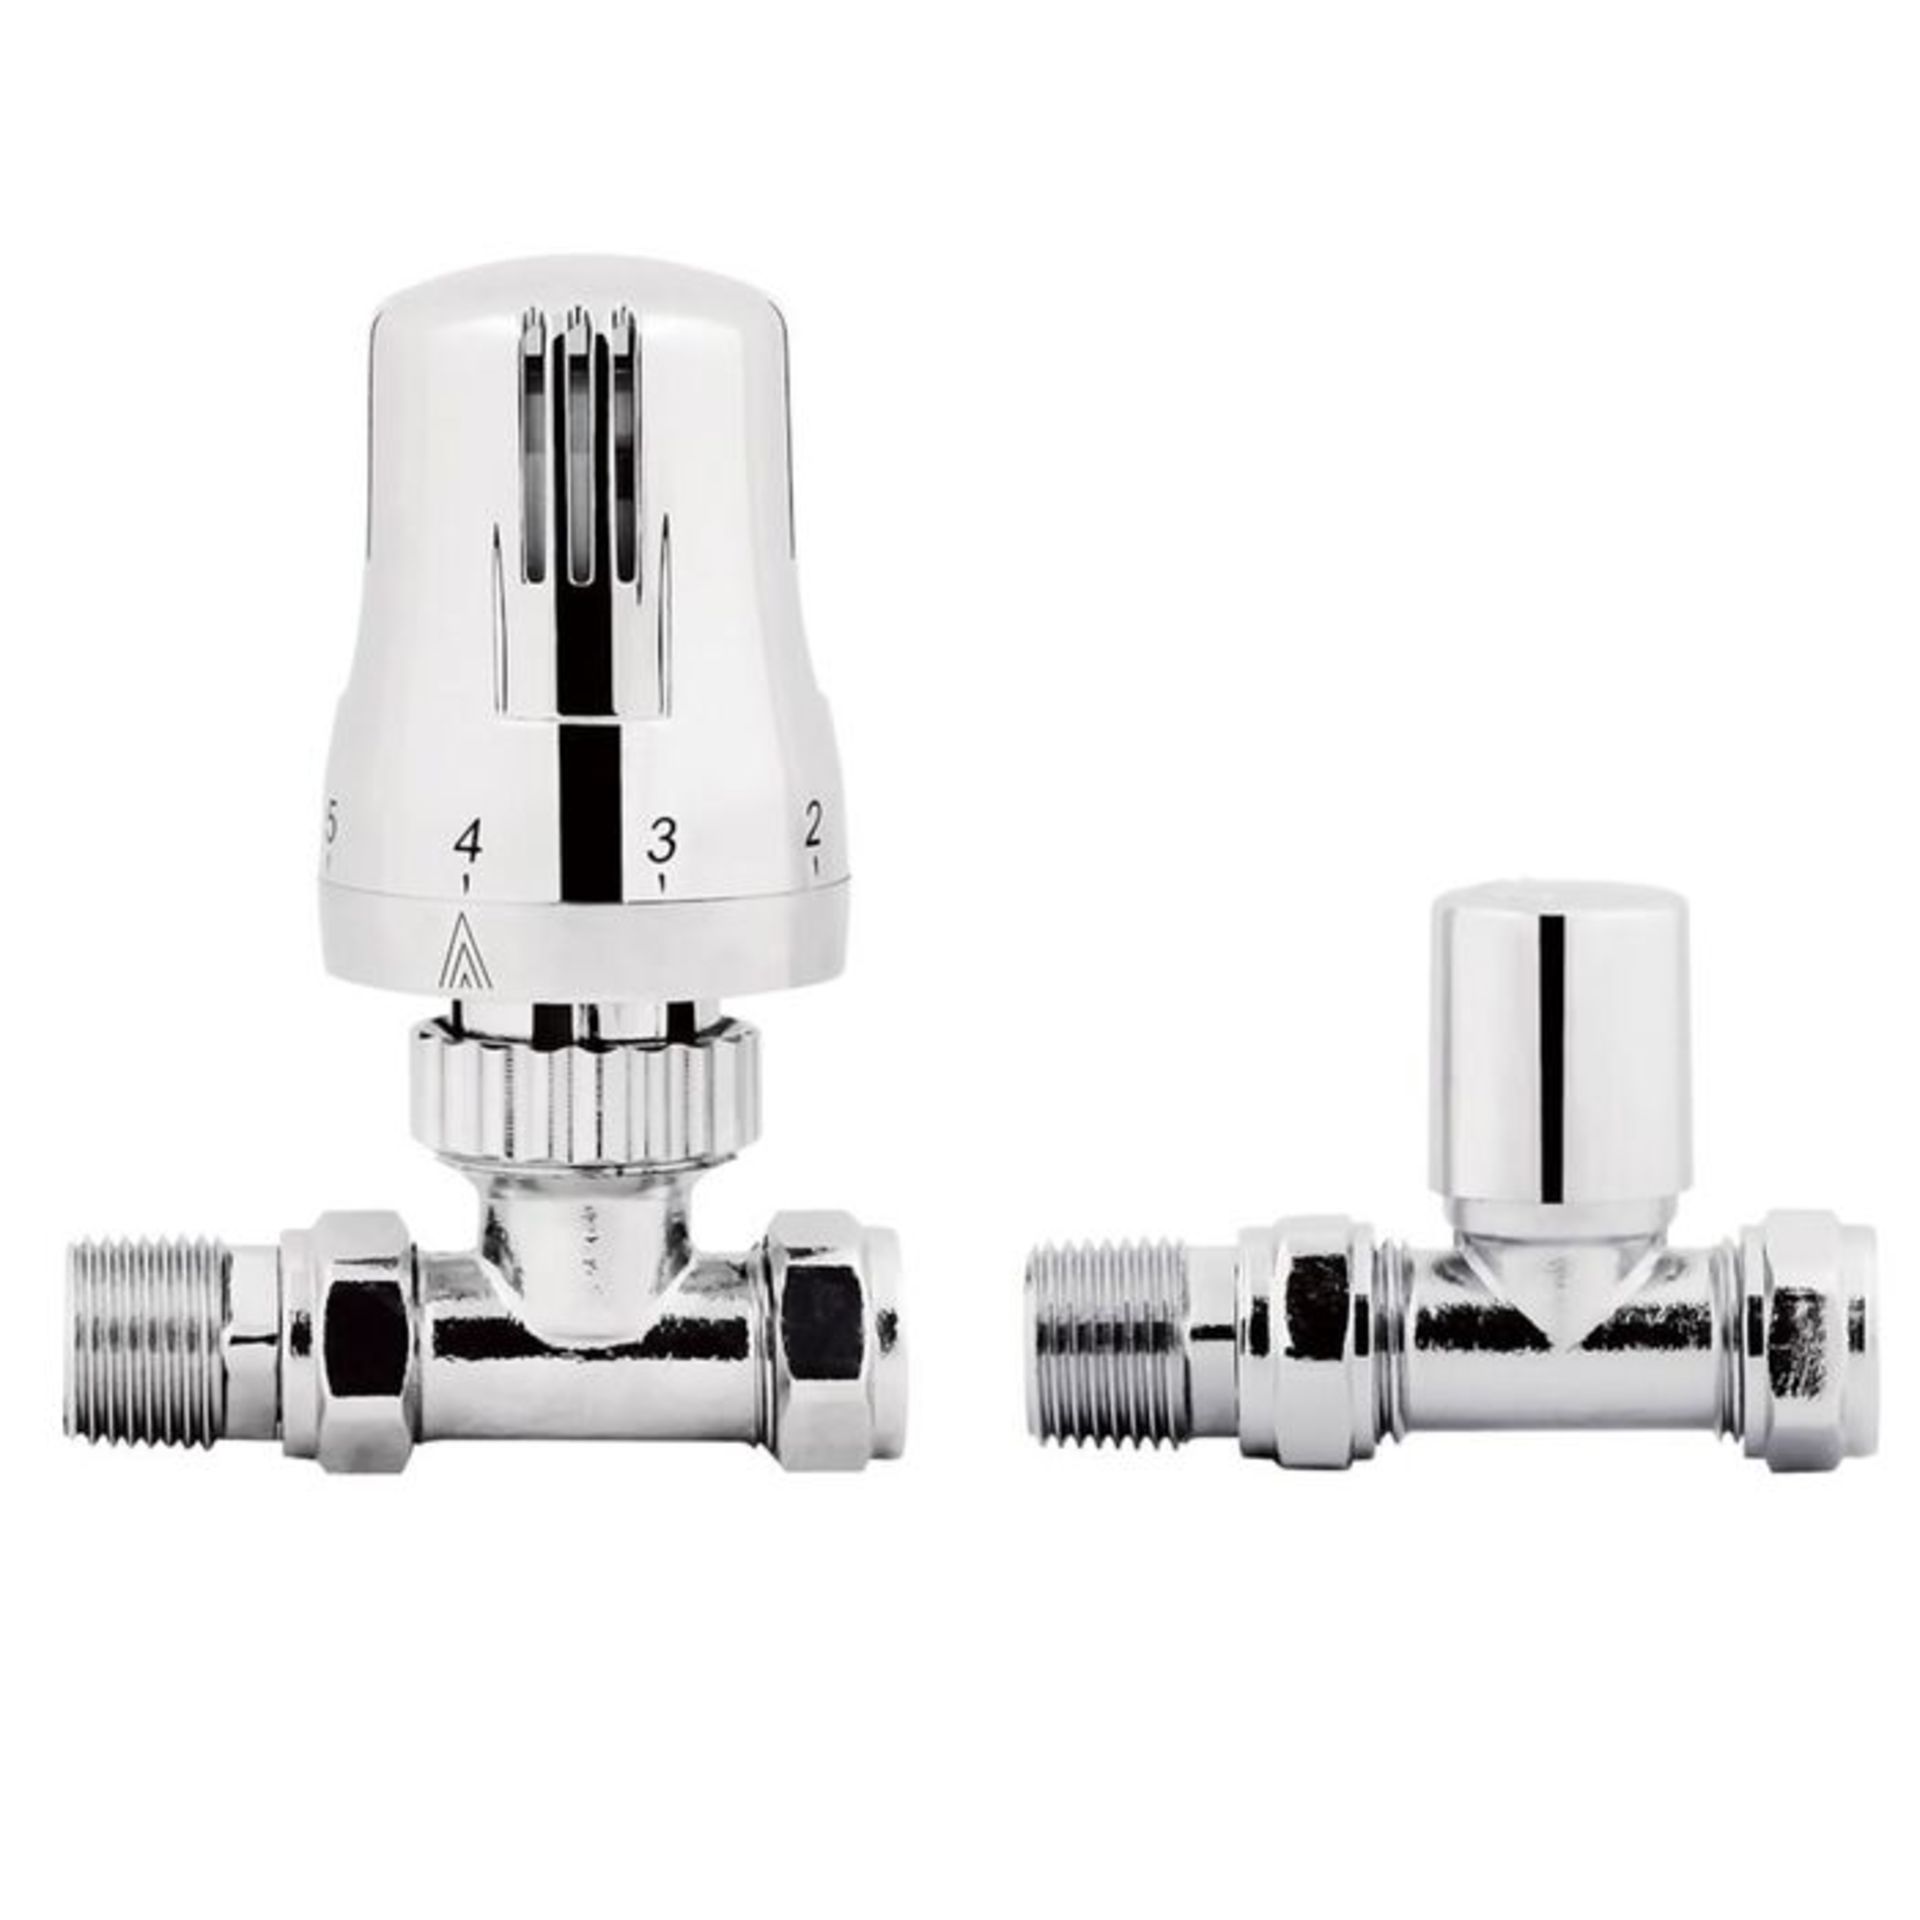 (NV143) 15mm Standard Connection Thermostatic Straight Chrome Radiator Valves Chrome Plated So... - Image 3 of 3